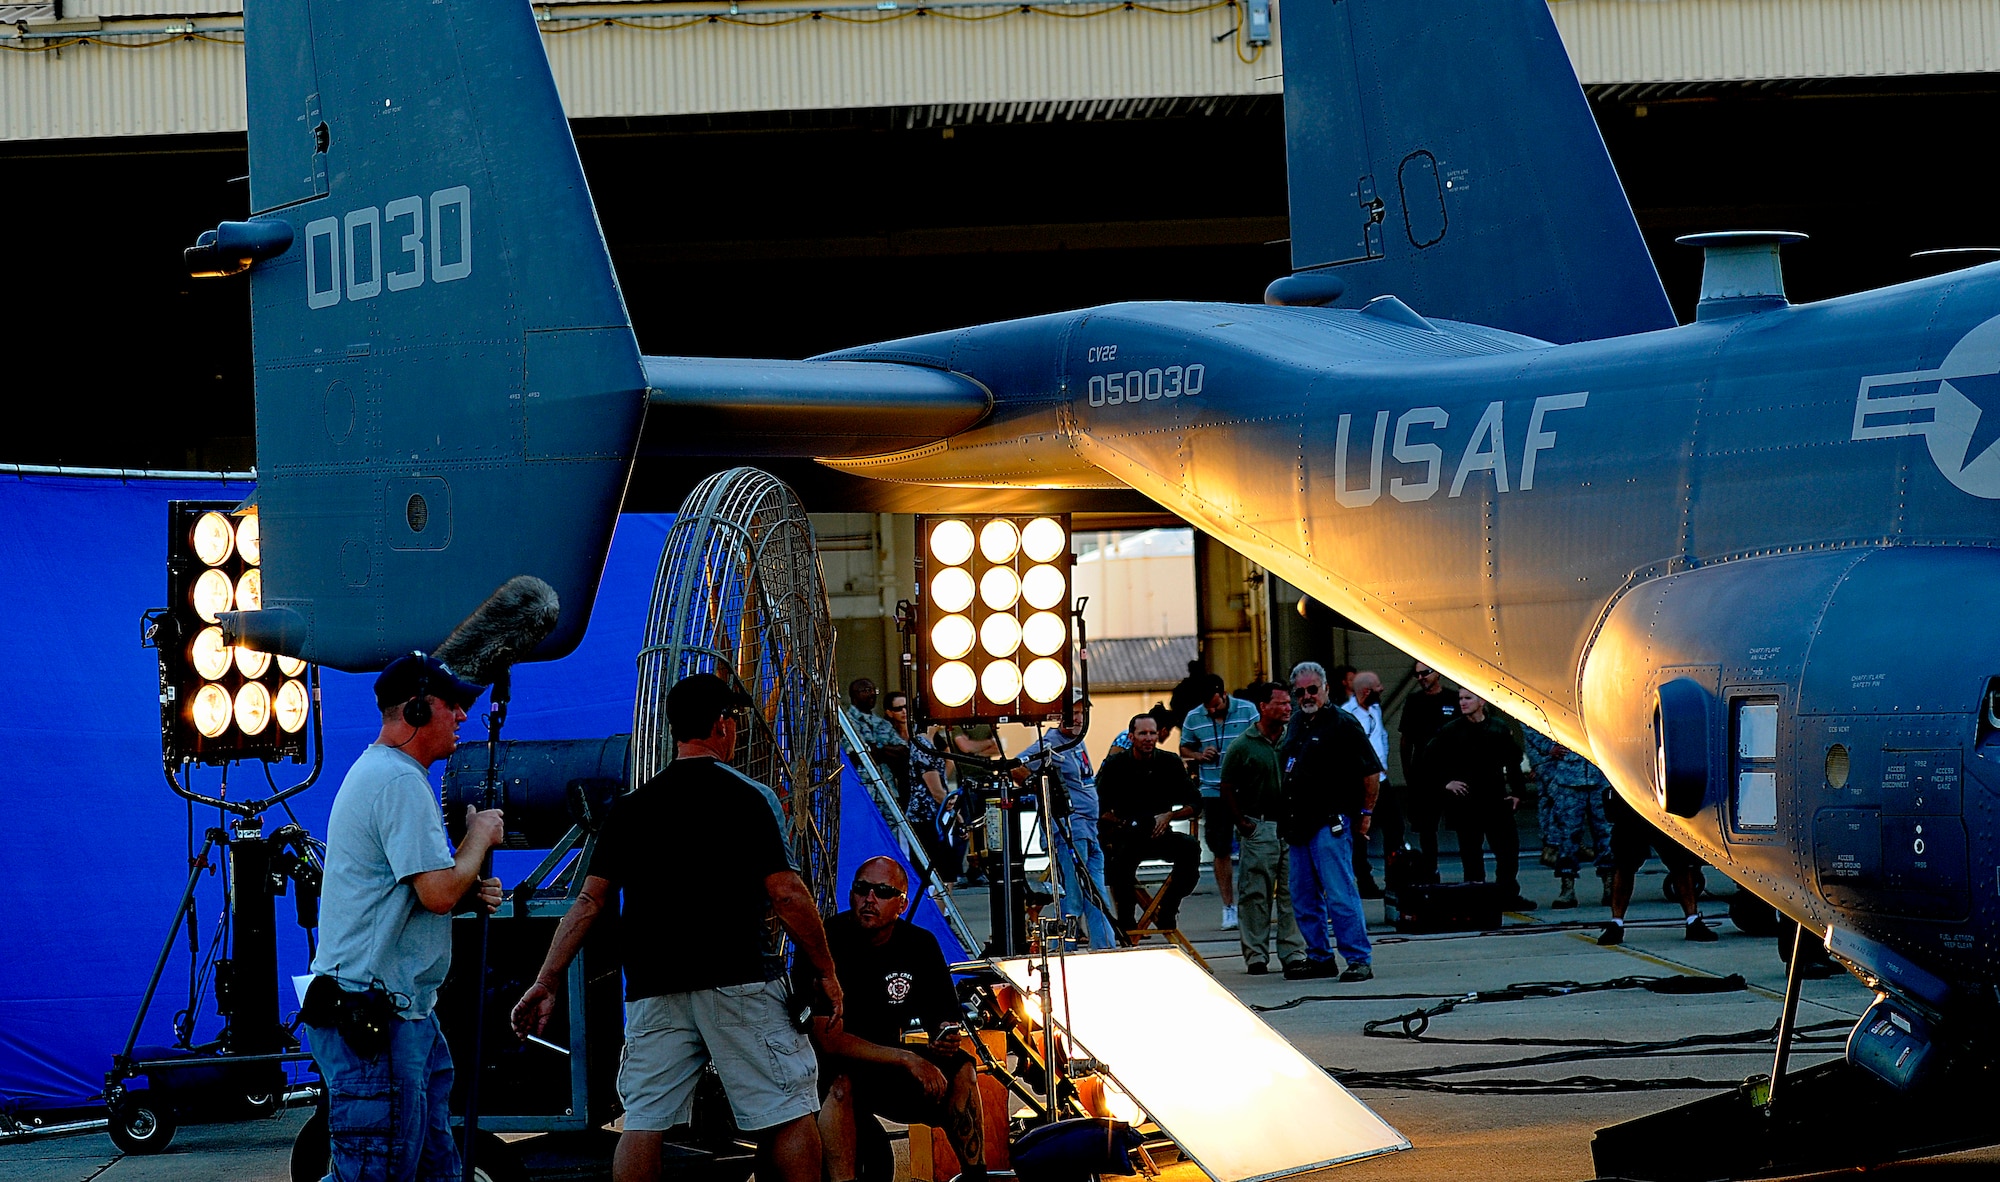 Transformers 3 Movie Set, shot at Hurlburt Field, Fla., Sep 29, 2010. The movie is directed by Michael Bay and stars Josh Duhamel. (U.S. Air Force Photo by Master Sgt. Russell E Cooley IV/Released)